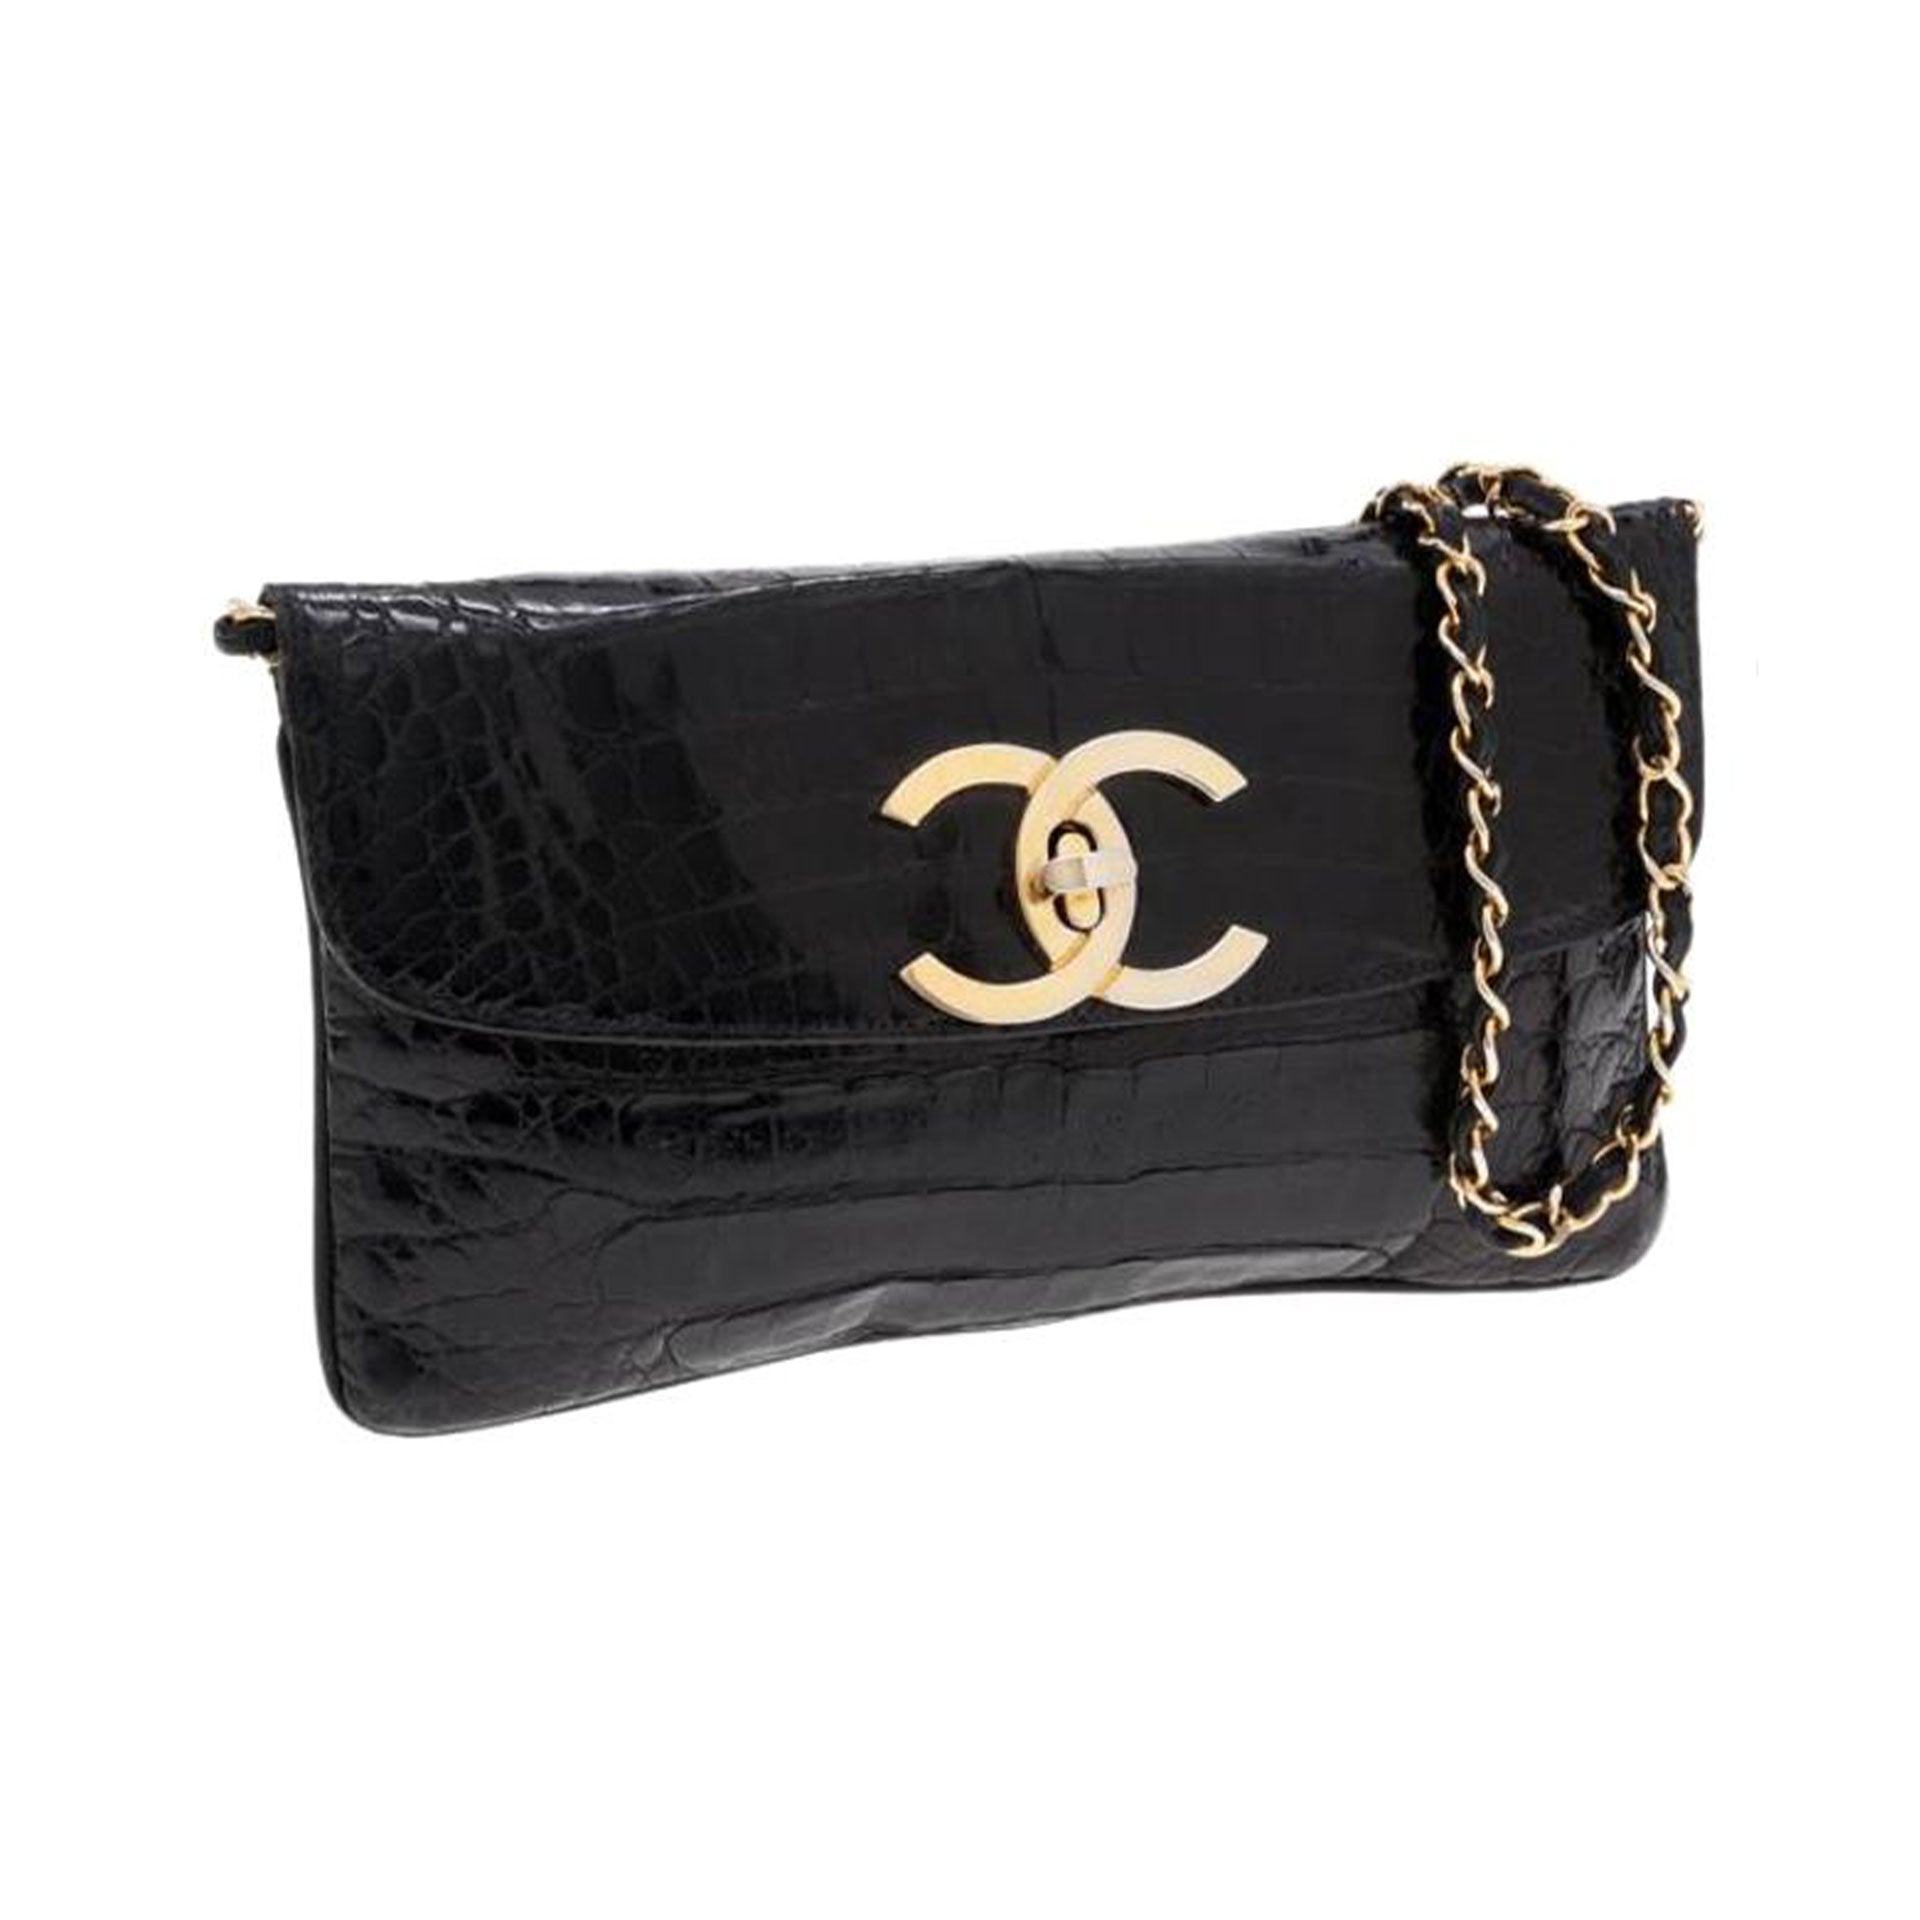 chanel clutches